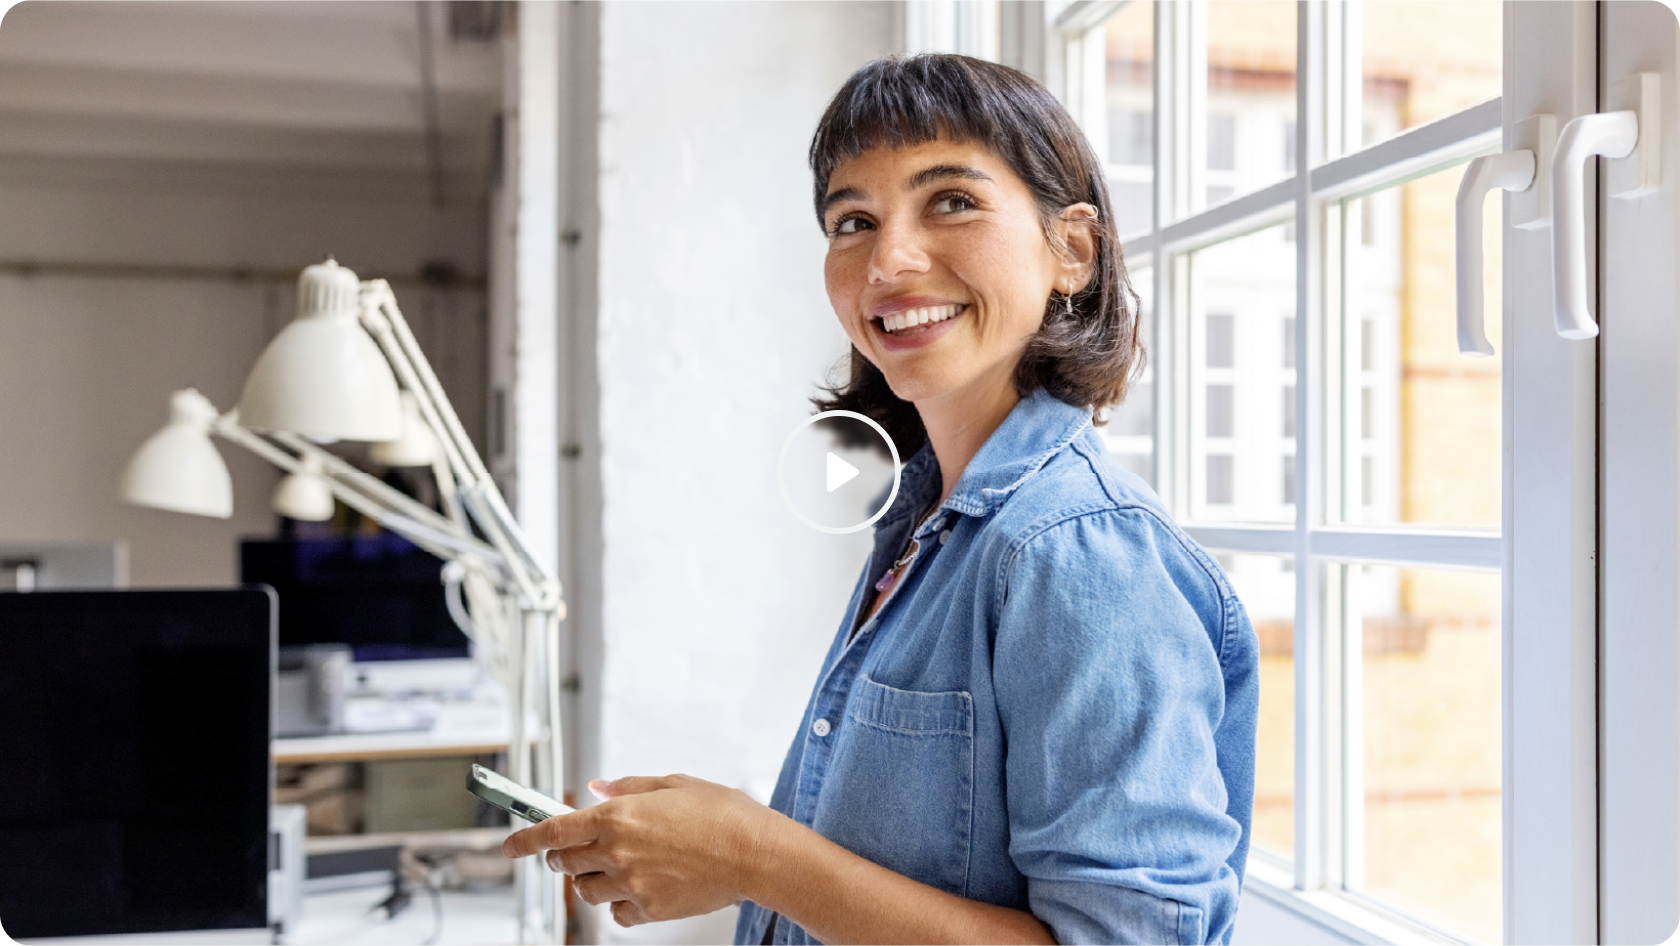 A woman at work place holding phone in her hand with a smile